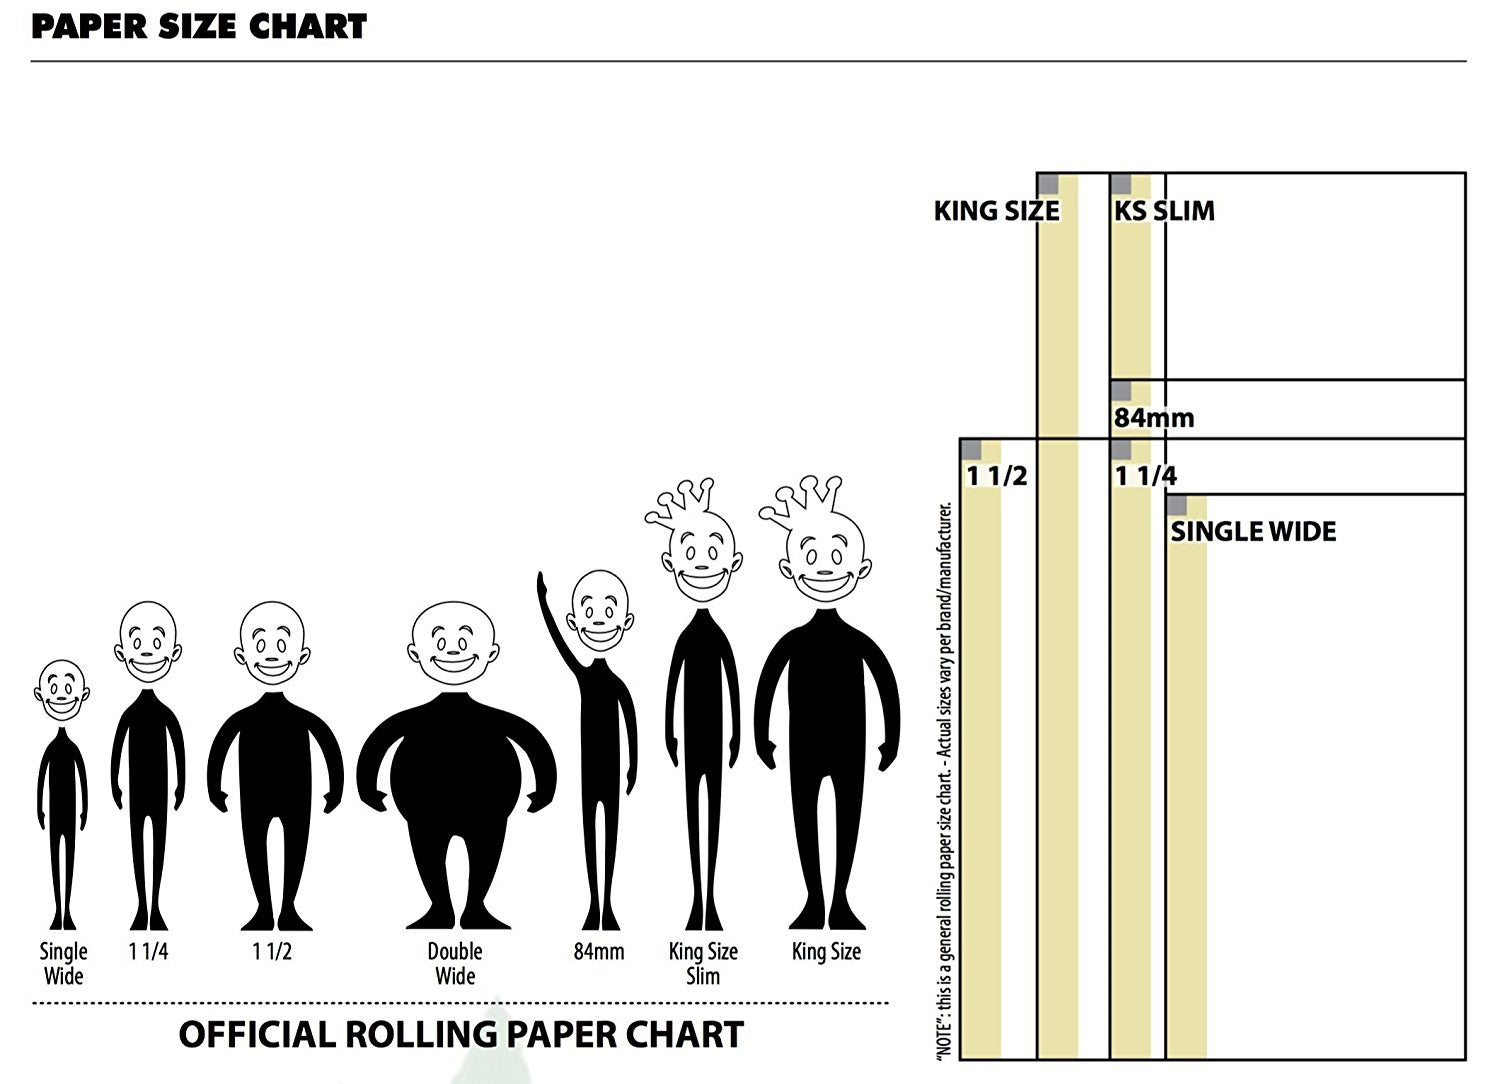 BECAUSE SIZE MATTERS: ROLLING PAPER SIZES